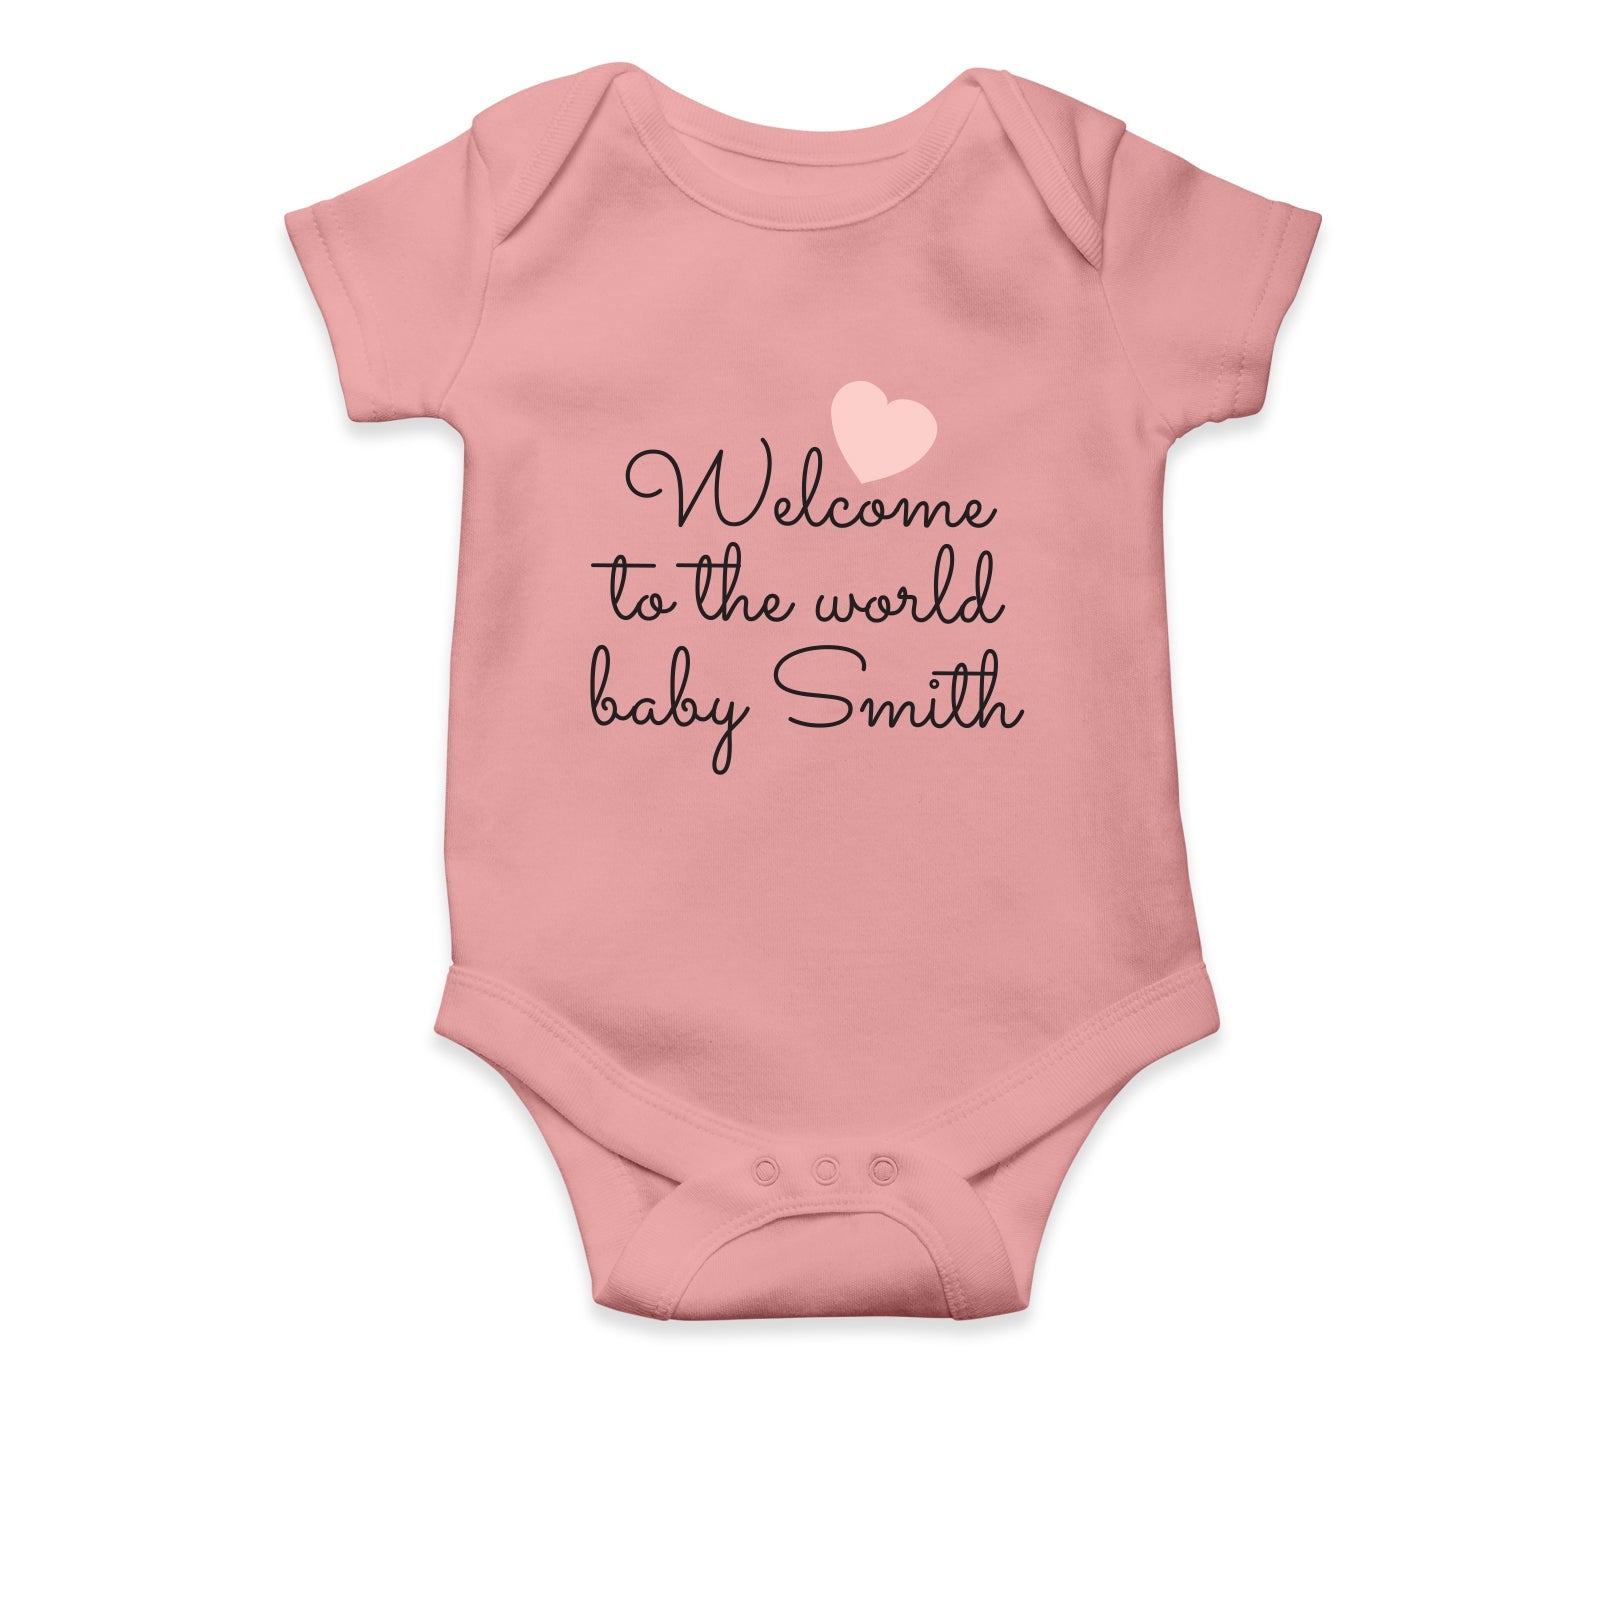 Personalised White Baby Body Suit Grow Vest - For Her